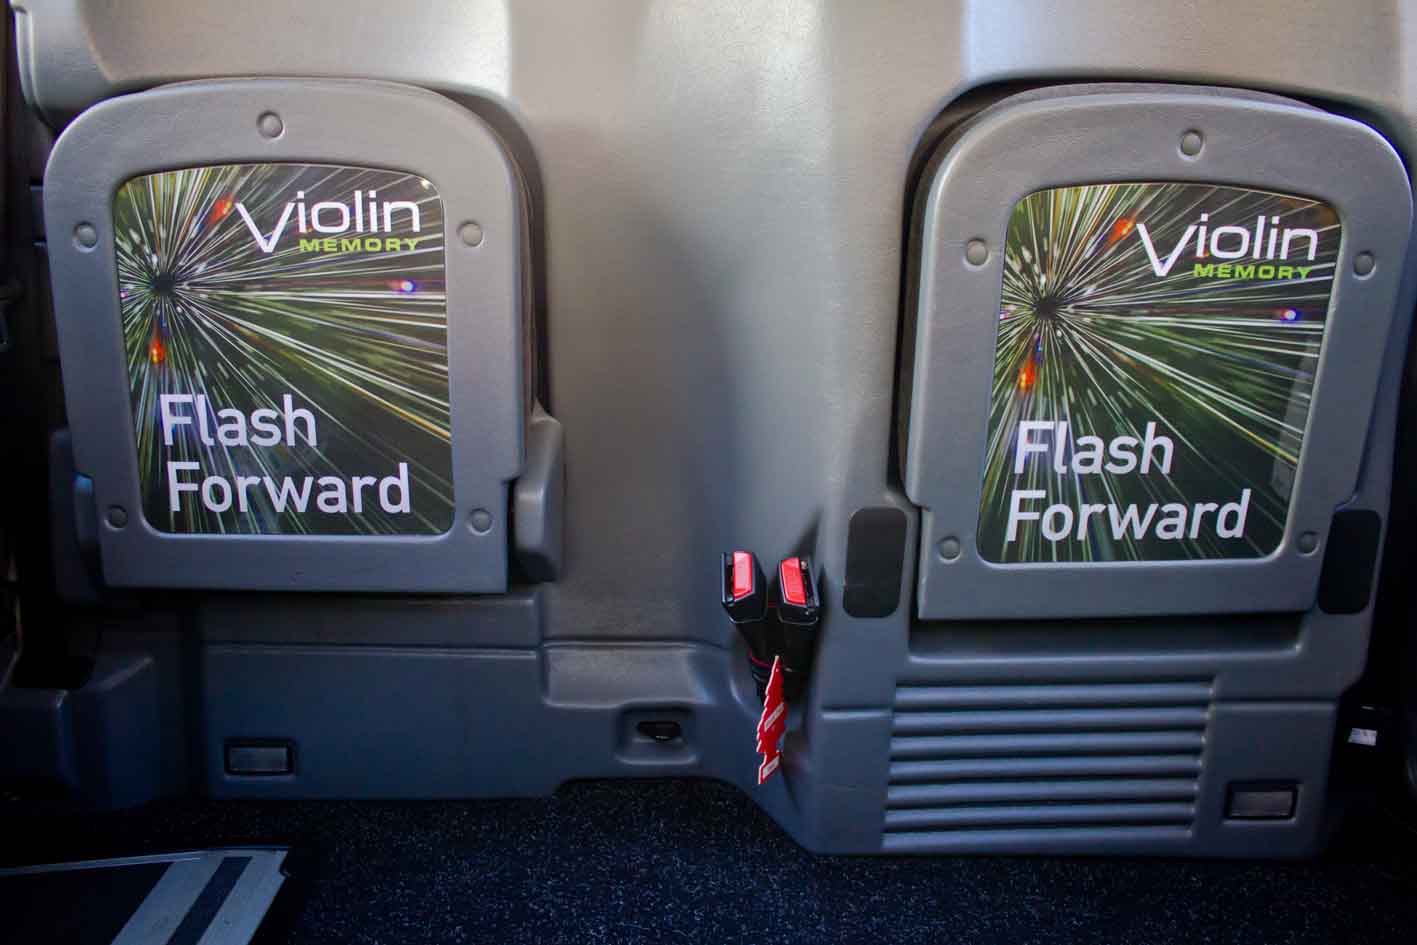 2011 Ubiquitous taxi advertising campaign for Violin Memory - Flash Forward